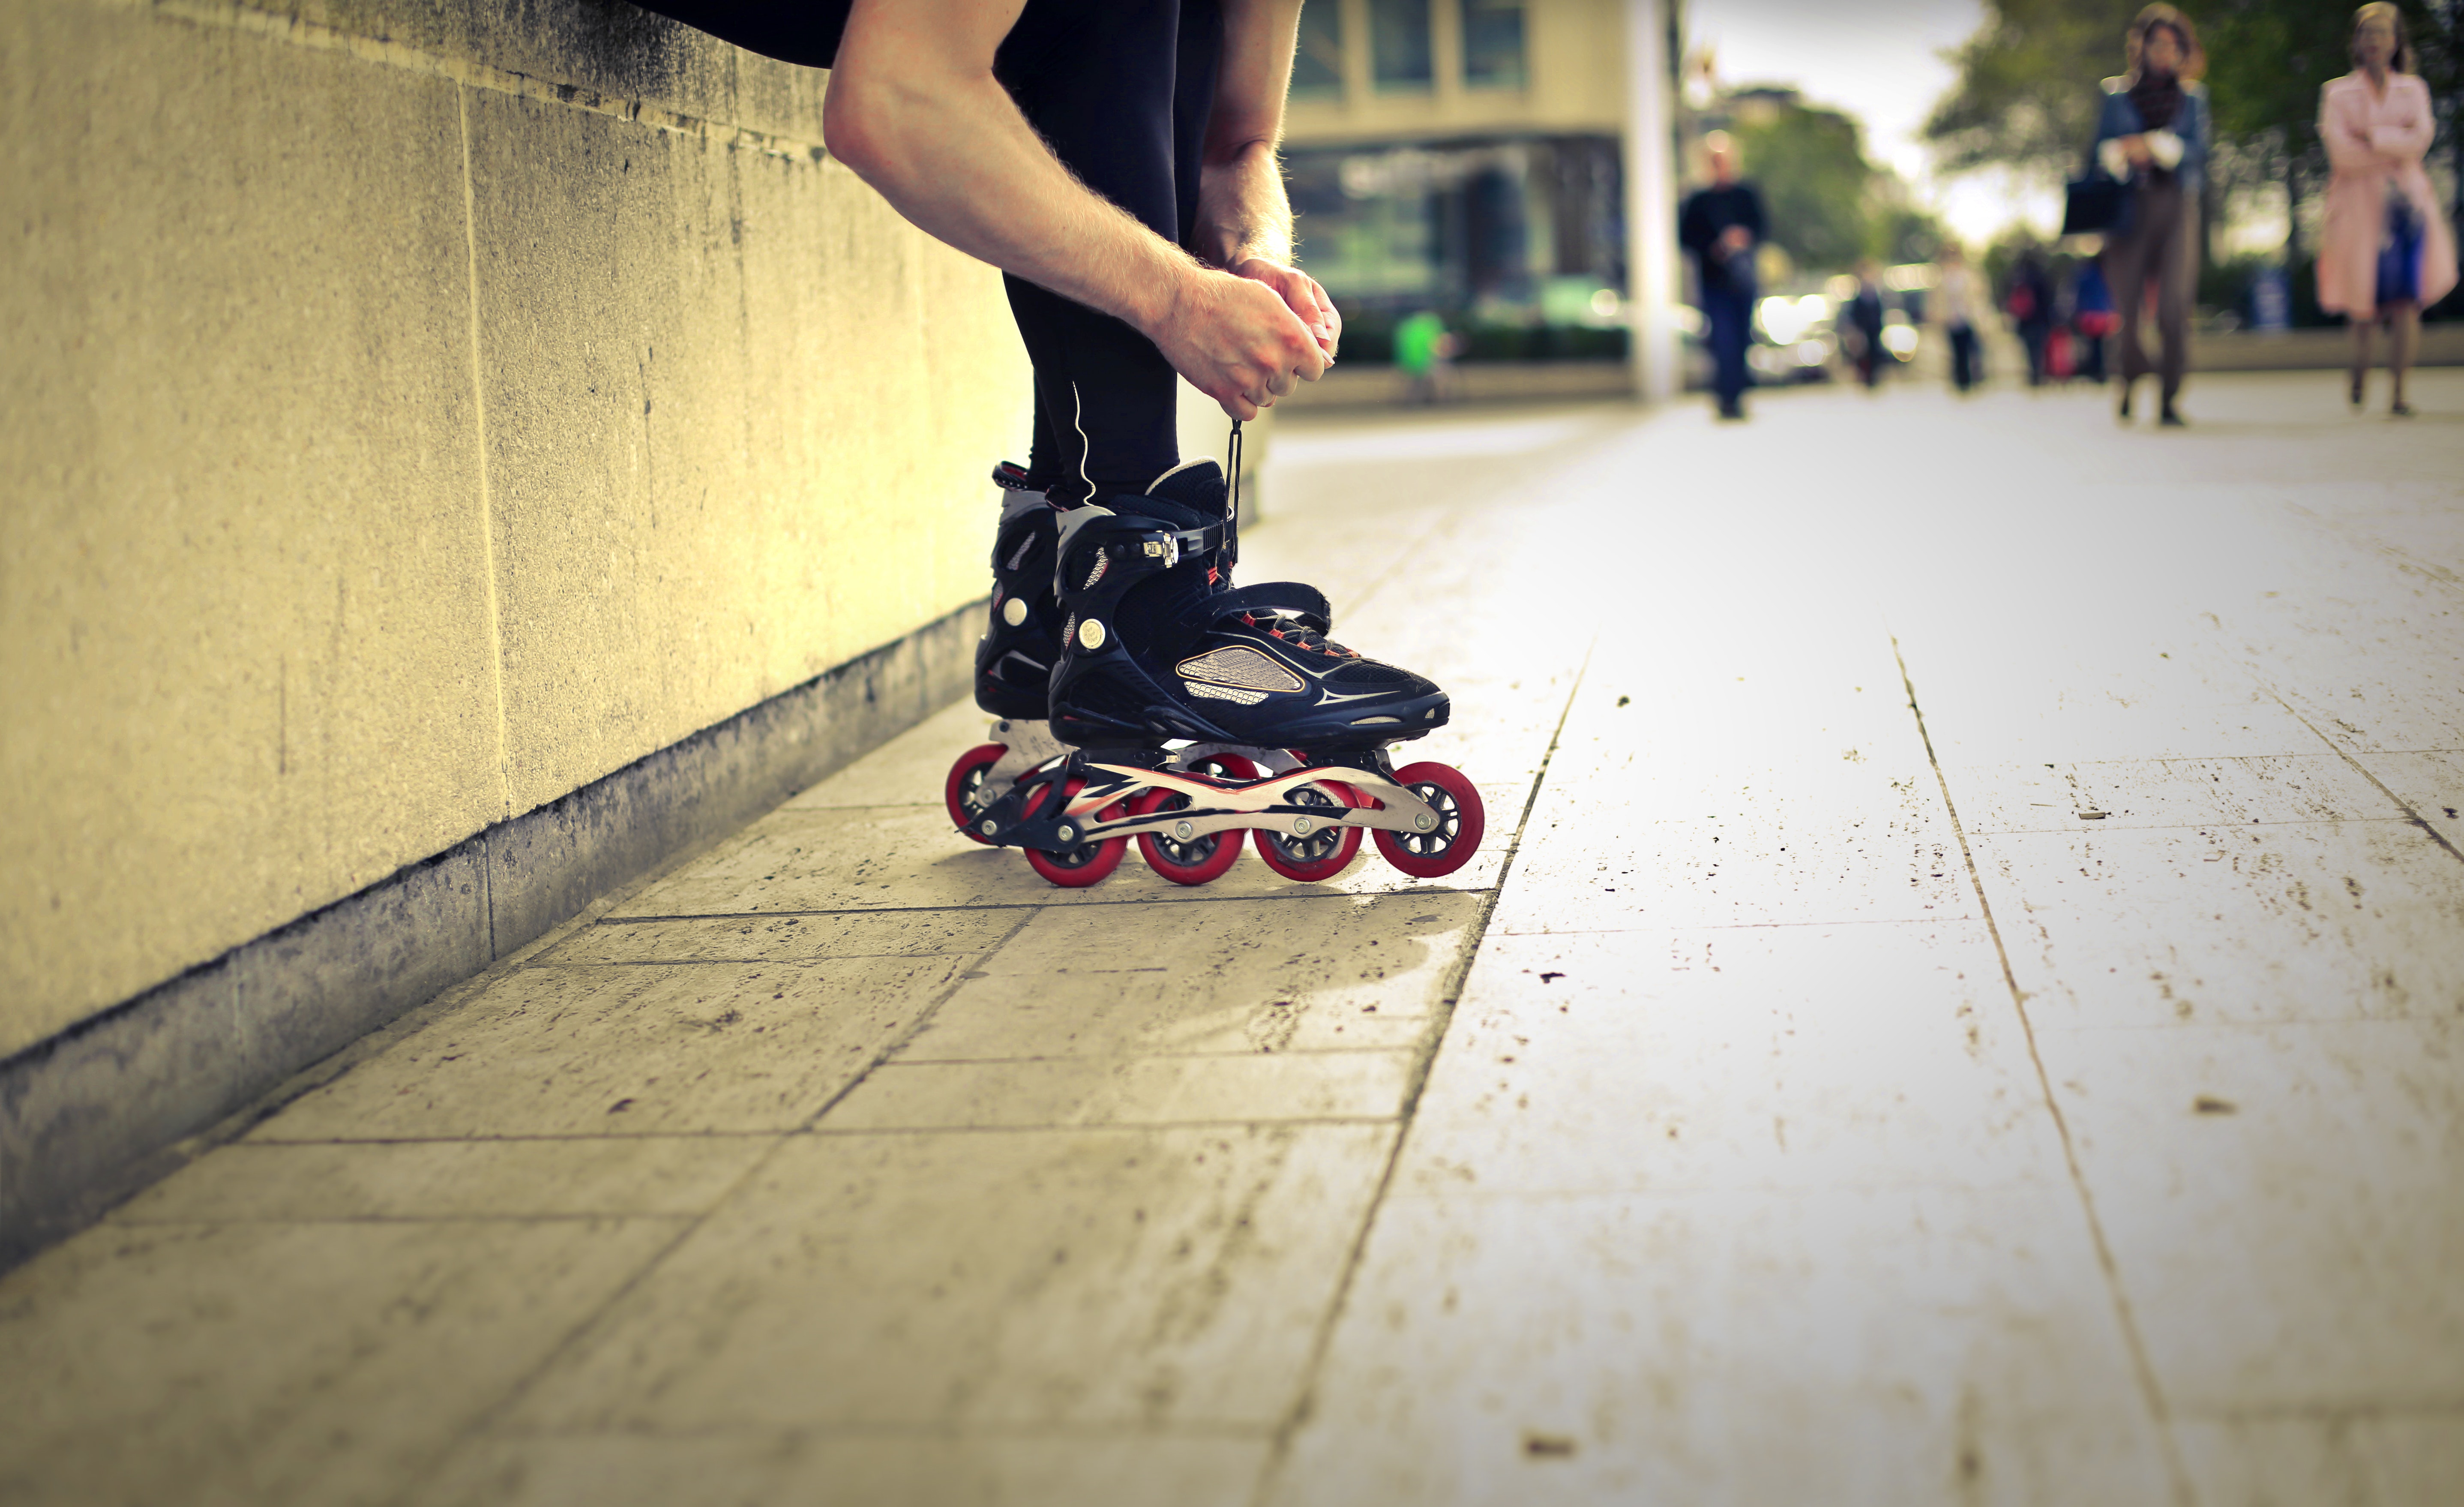 Roller skate photos download the best free roller skate stock photos hd images